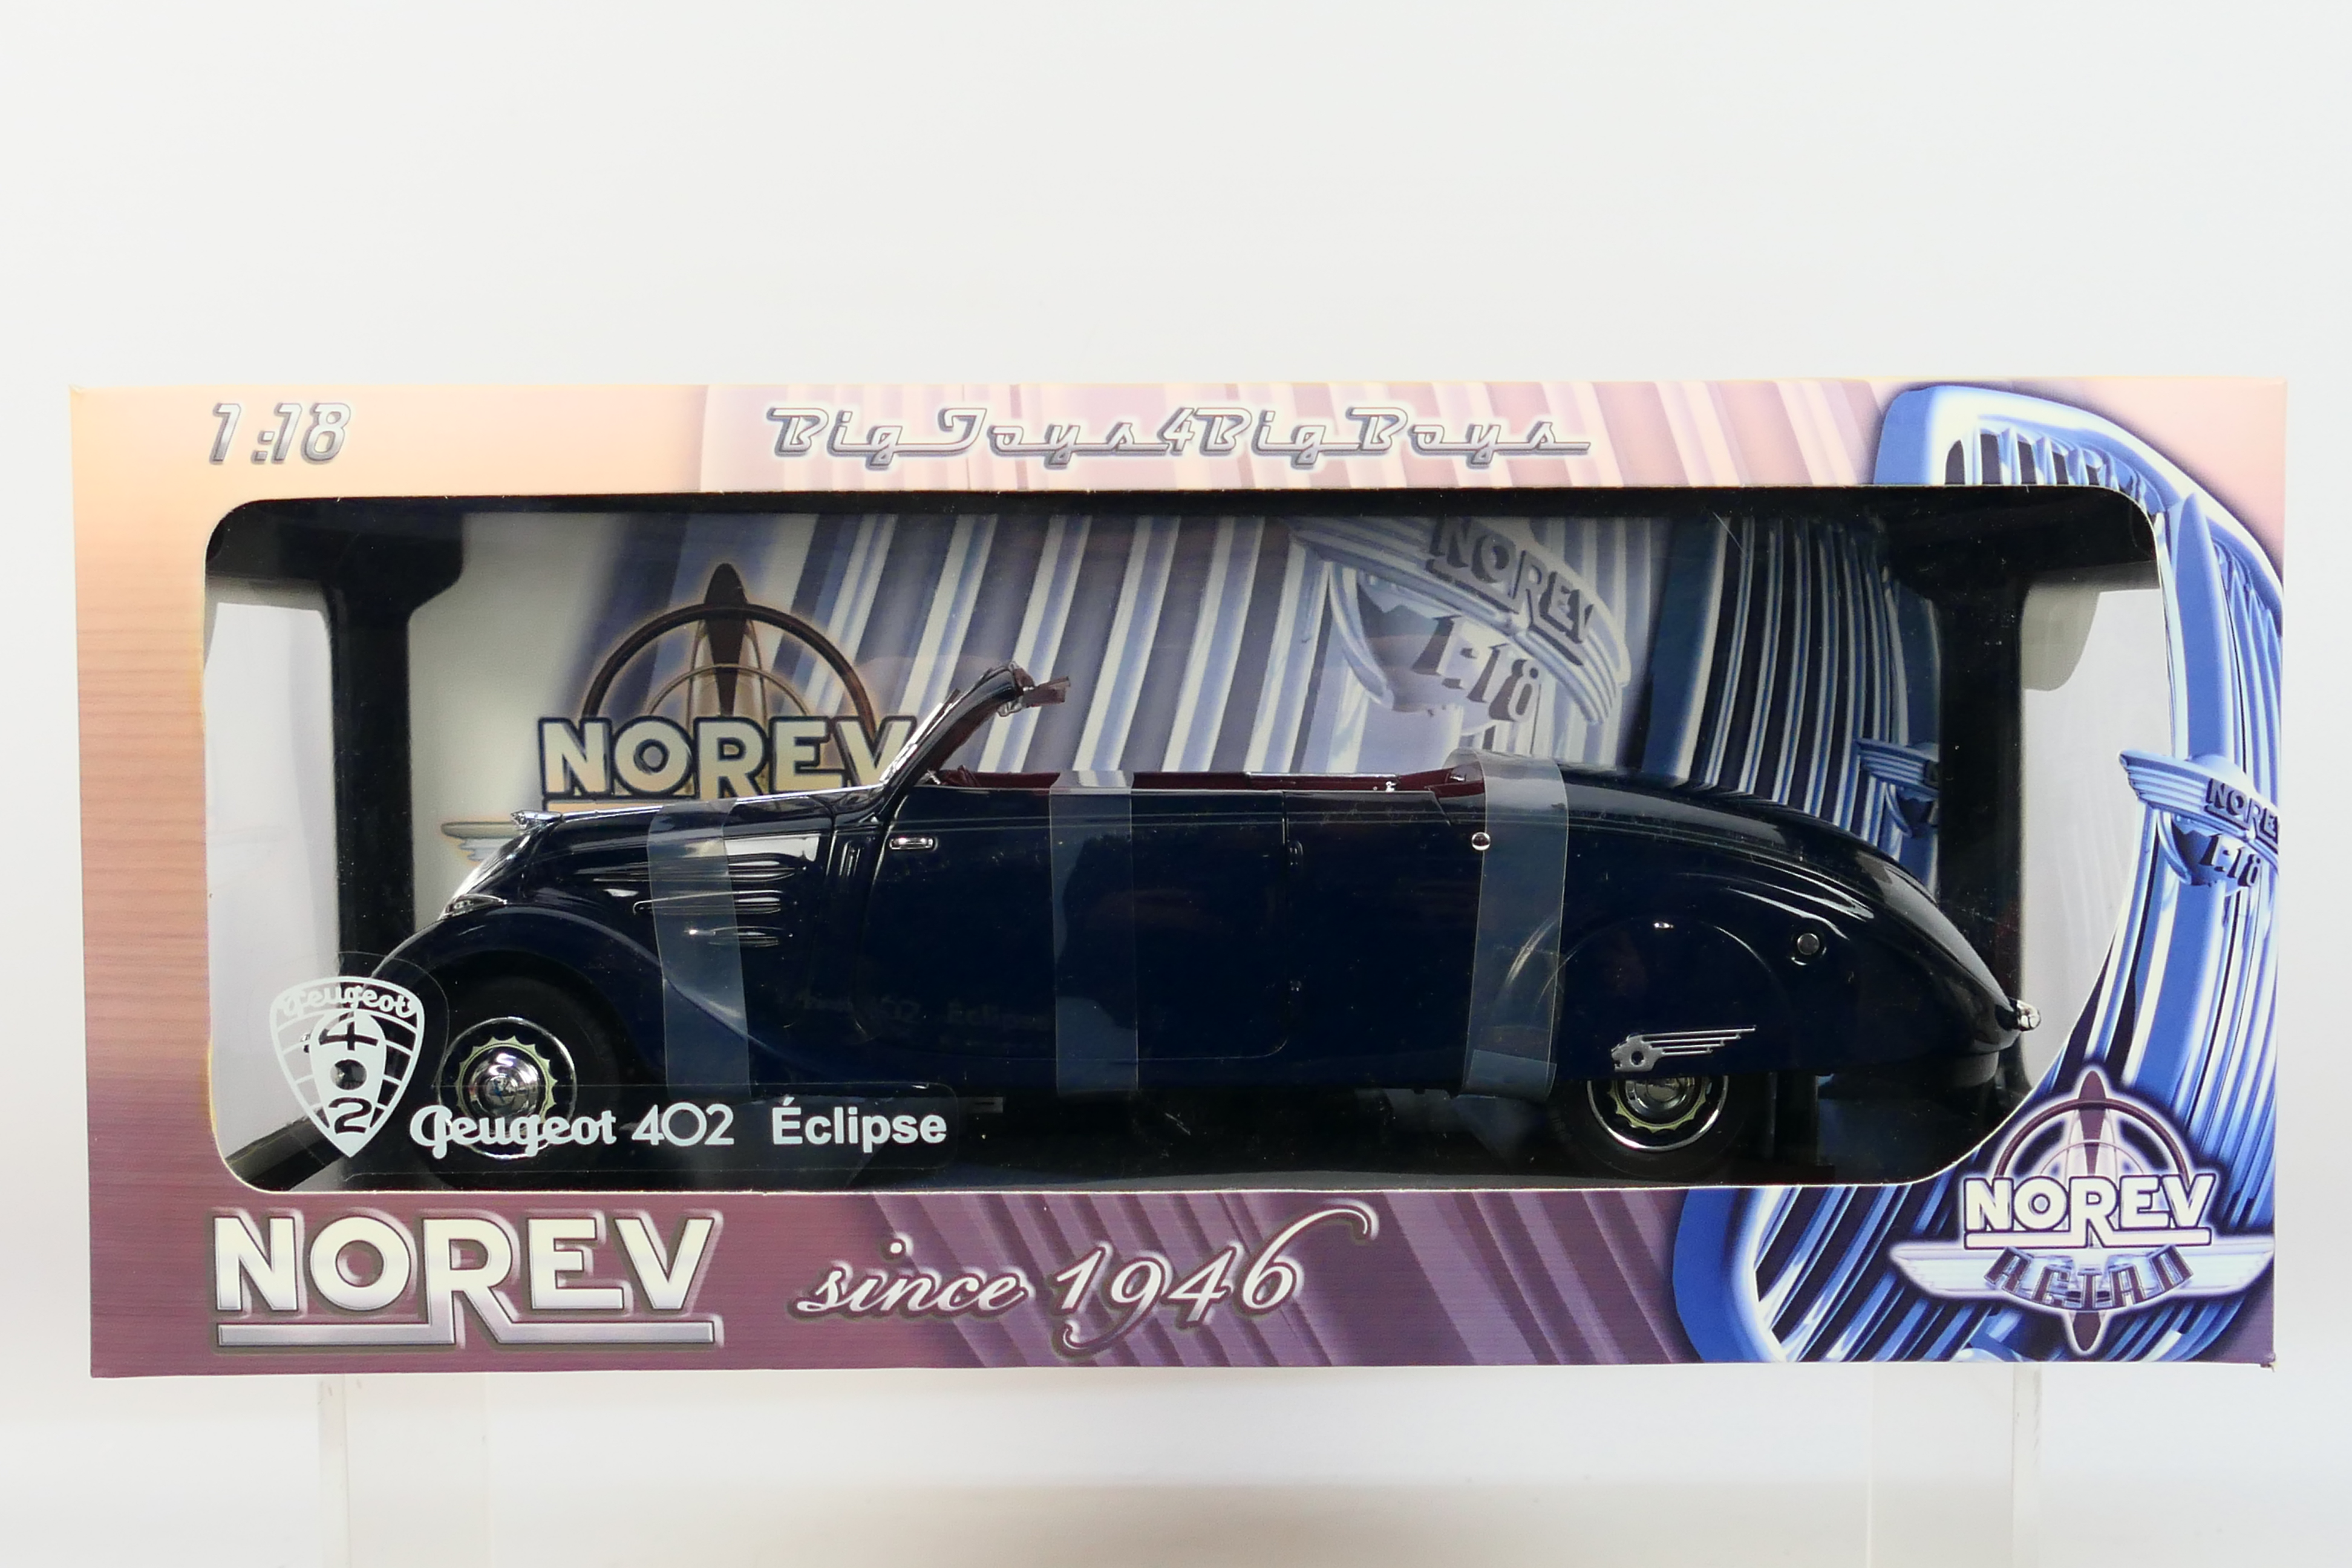 Norev - A boxed 1:18 scale Norev #184704 Peugeot 402 Eclipse.